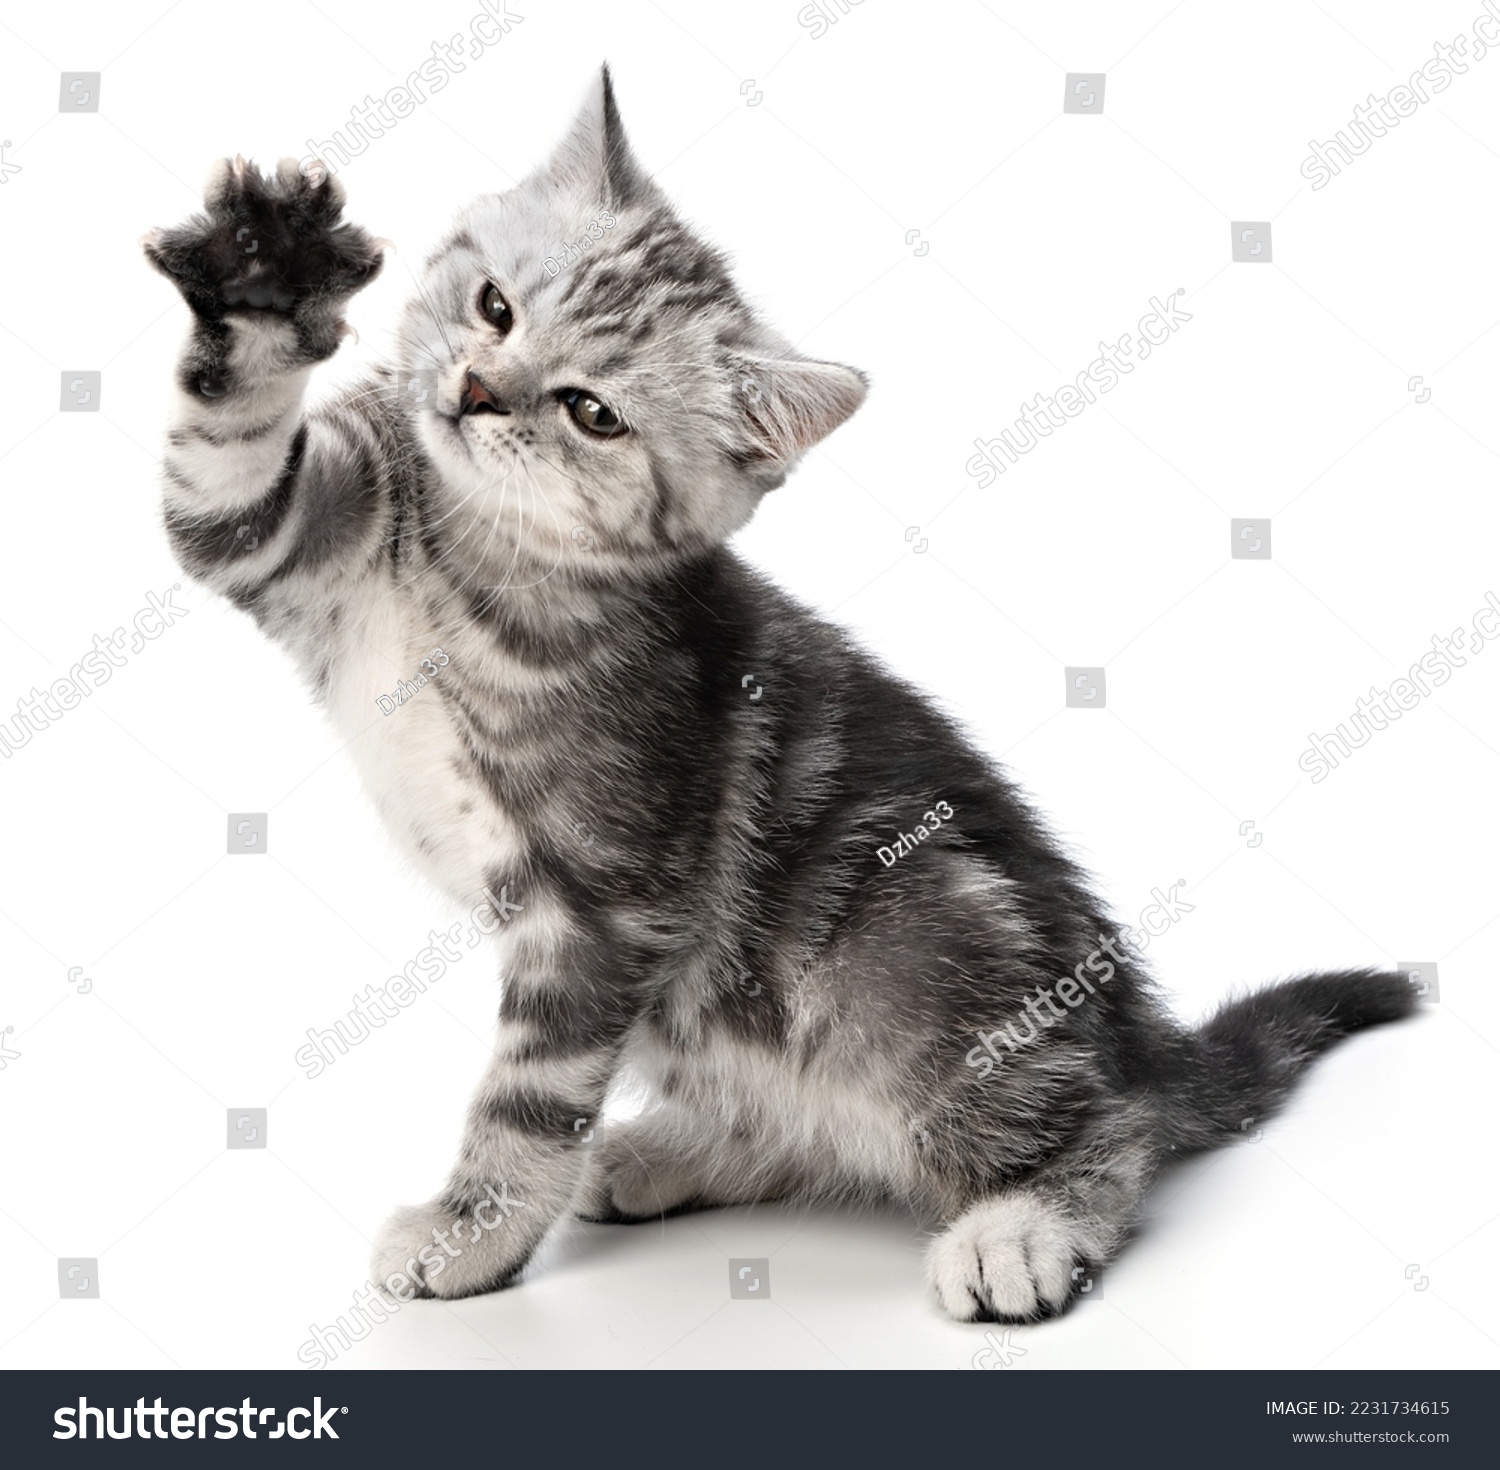 Playful kitten cat isolated on white. Cute baby tabby kitten playing and swinging its paws. Kitty is standing on its hind legs having fun playing #2231734615